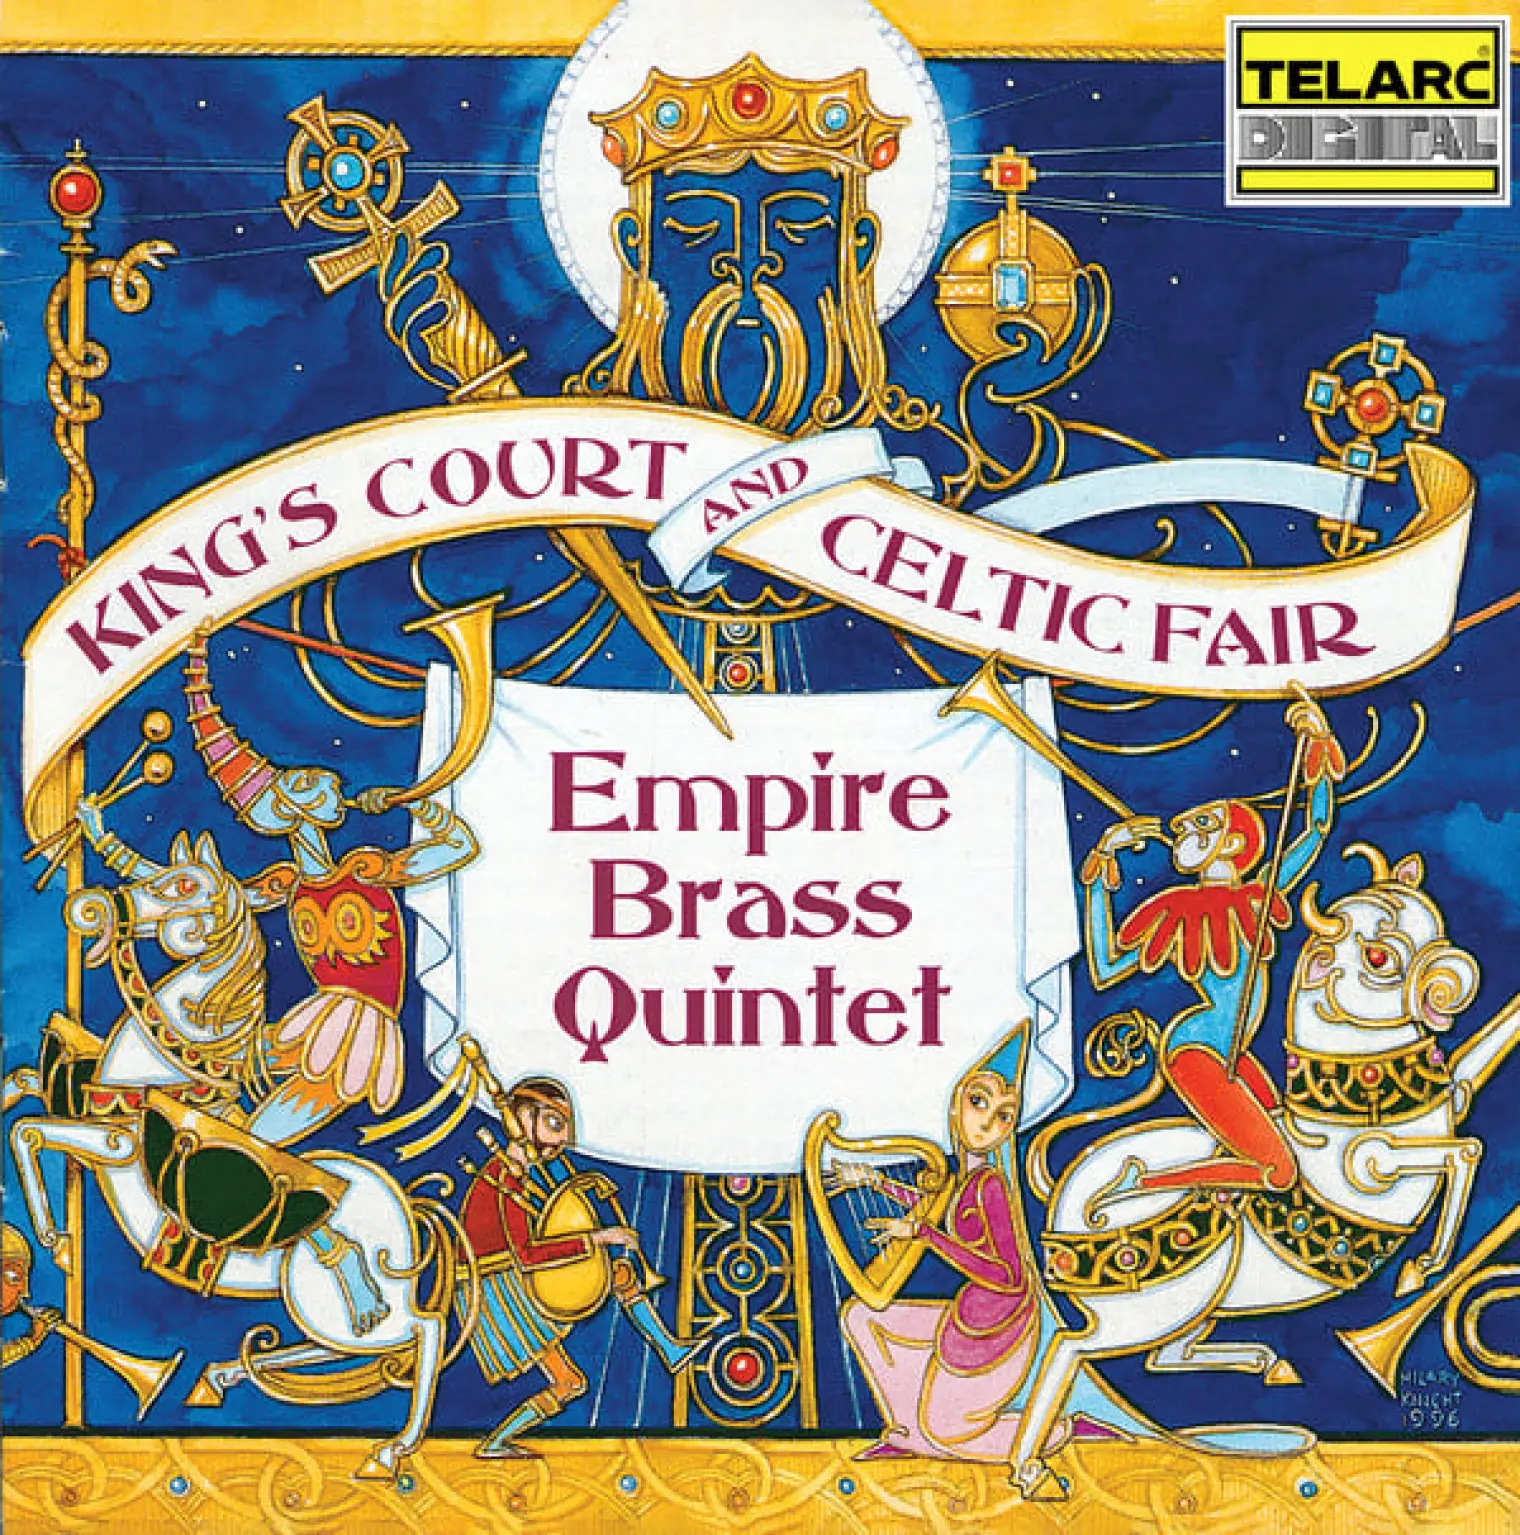 King's Court and Celtic Fair -  Empire Brass 